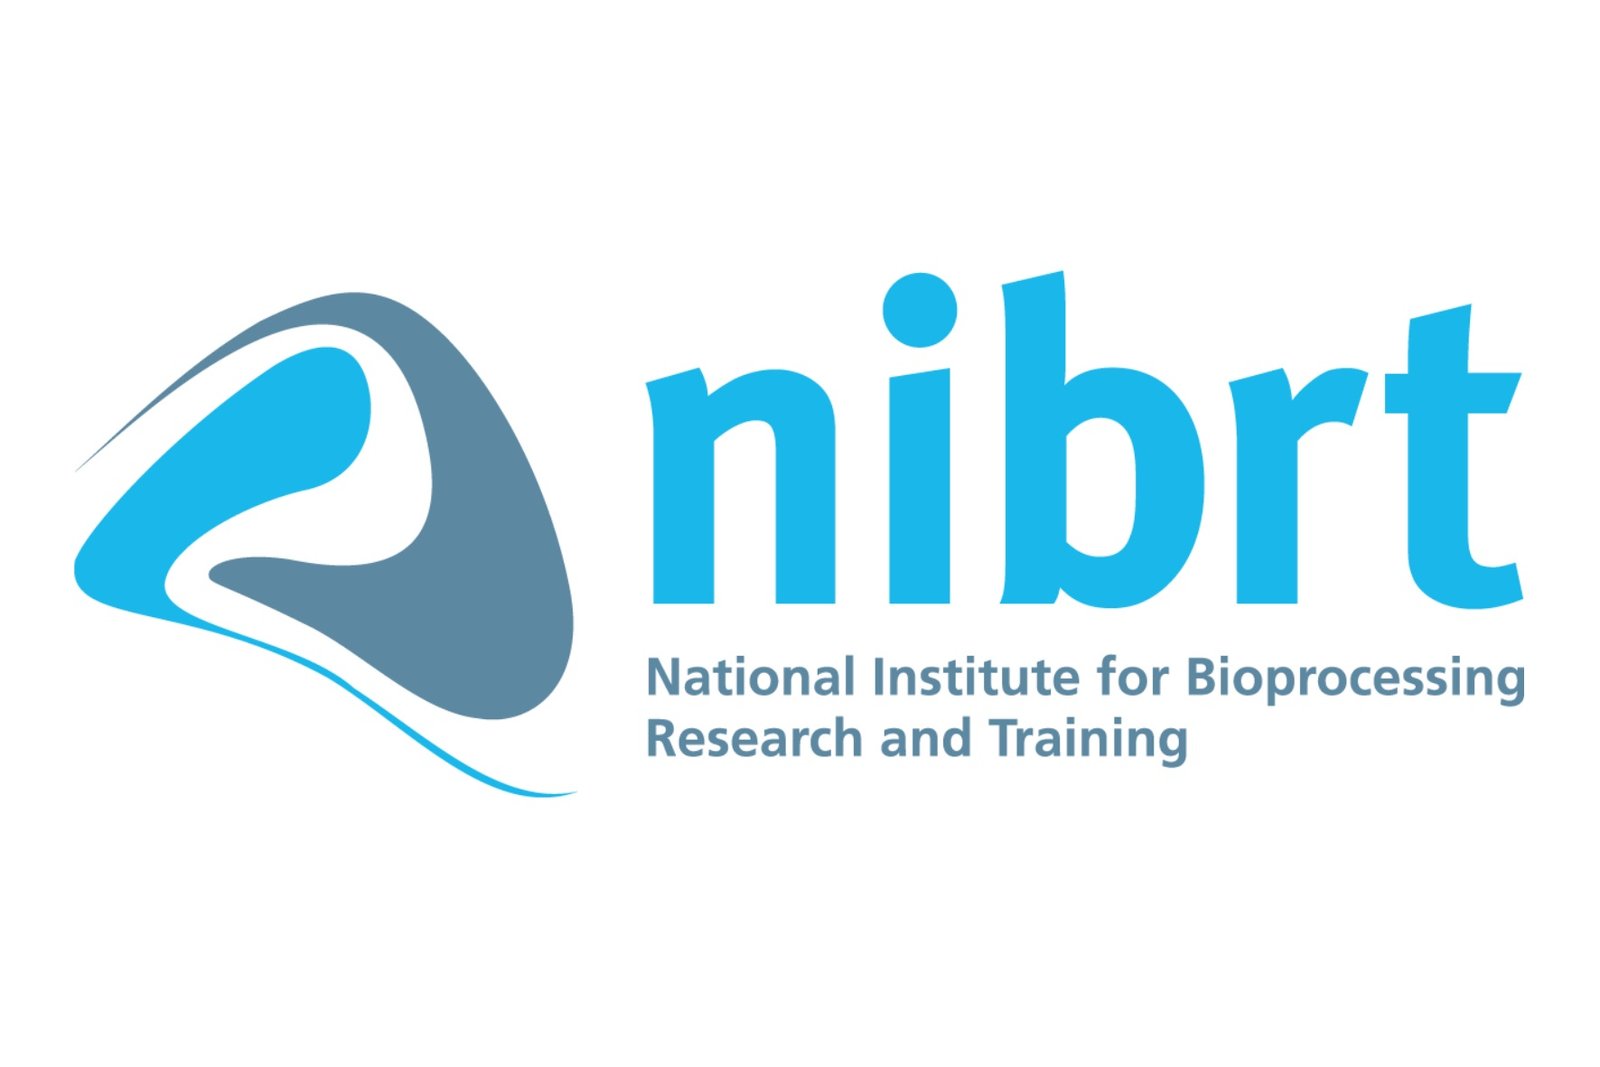 National Institute for Bioprocessing Research and Training